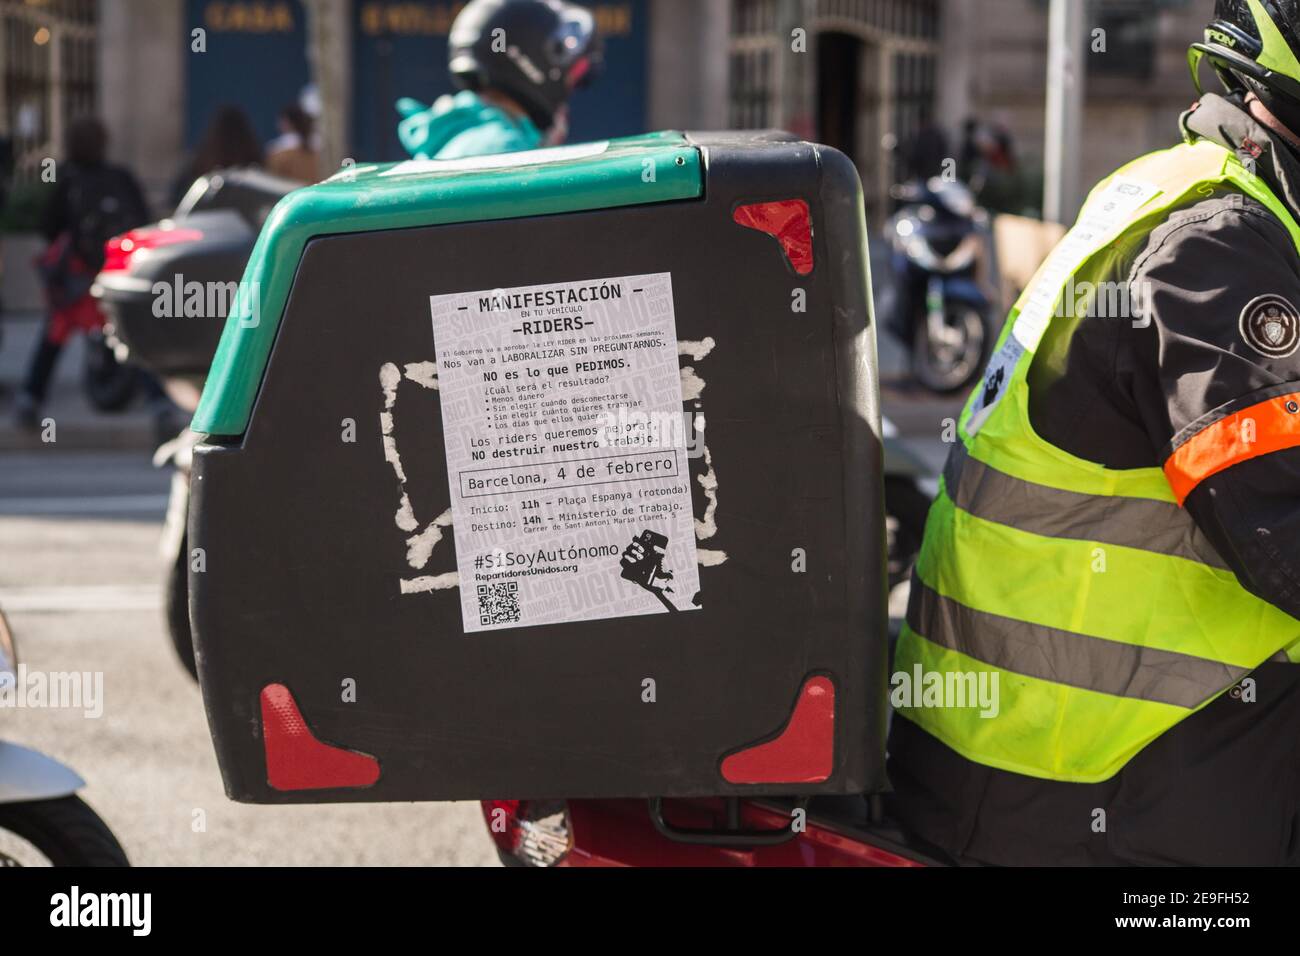 Delivery man is seen with a sign on his bag during the  demonstration.Hundreds of delivery people from different home delivery  platforms such as Deliveroo, Uber Eats, Glovo, Stuart and also from Amazon